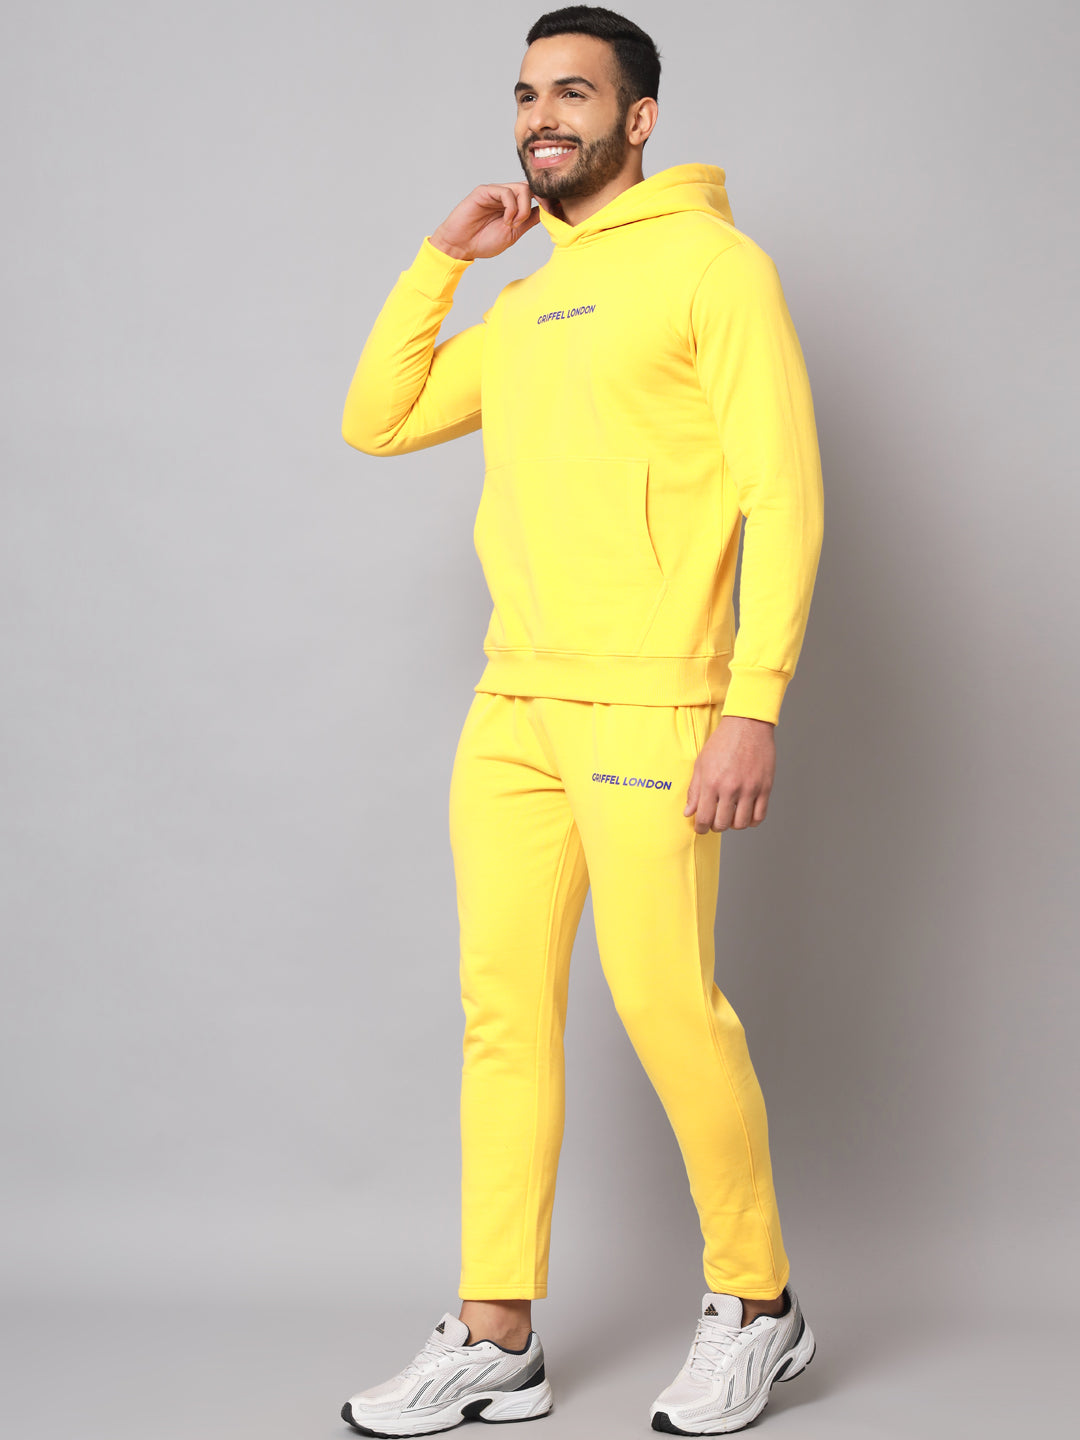 Griffel Men's Front Logo Solid Fleece Basic Hoodie and Joggers Full set Yellow Tracksuit - griffel